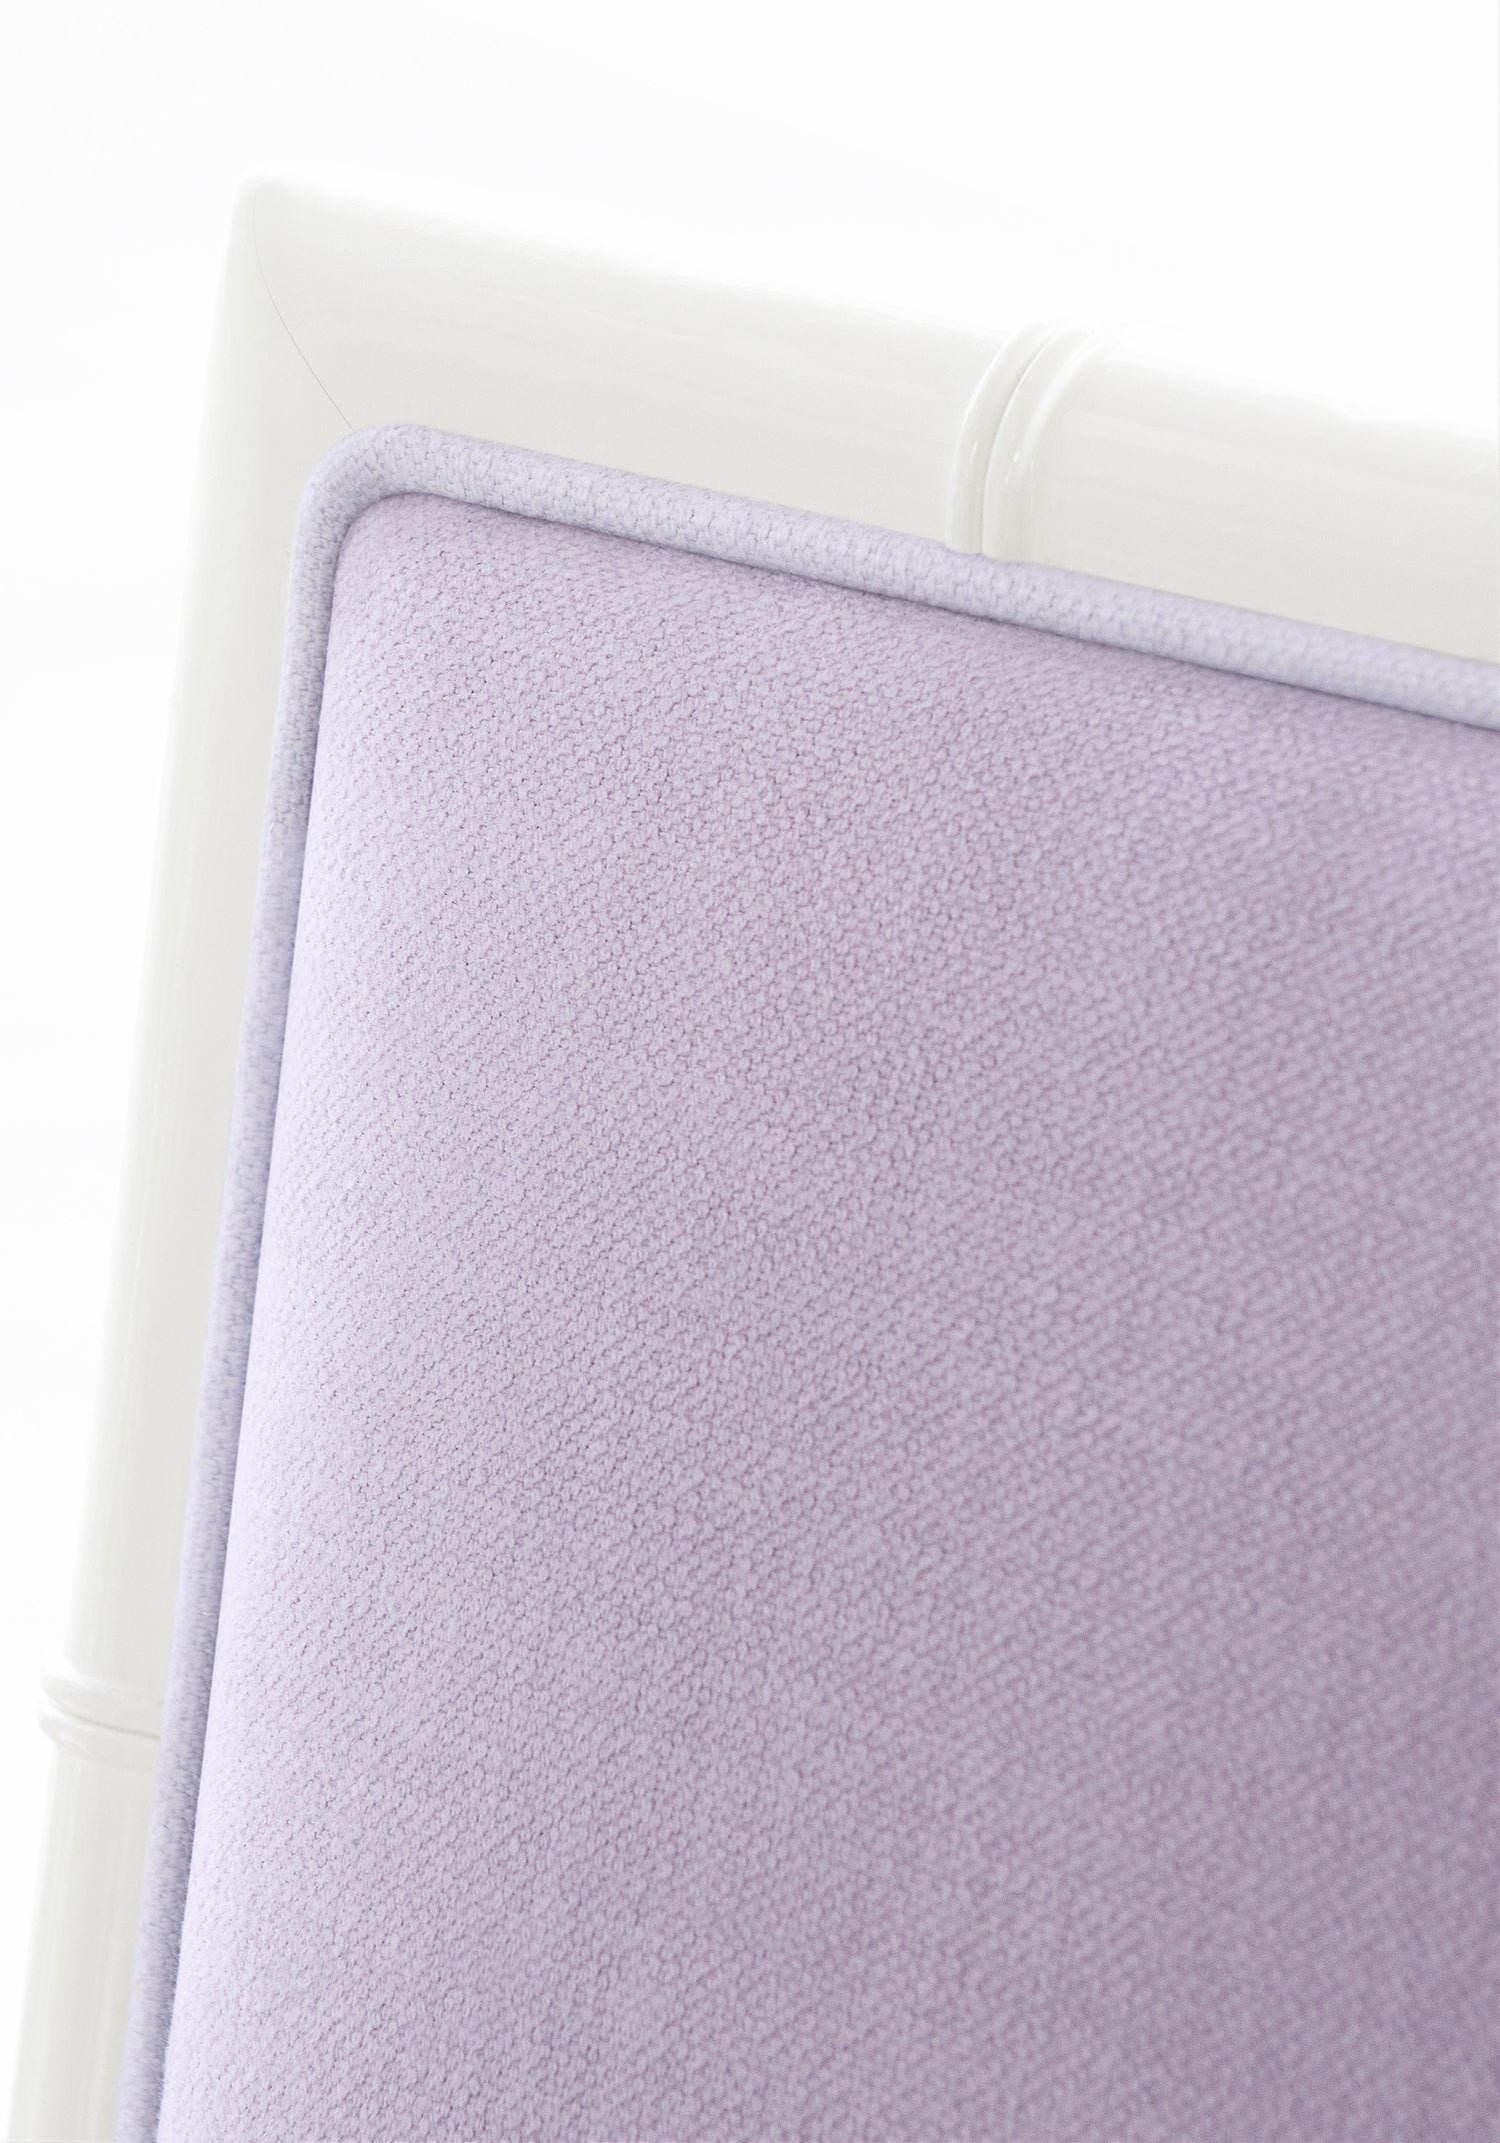 Detailed view of Darien Dining Chair in Prisma woven fabric in lilac color - pattern number W70135 by Thibaut in the Woven Resource Vol 12 Prisma collection